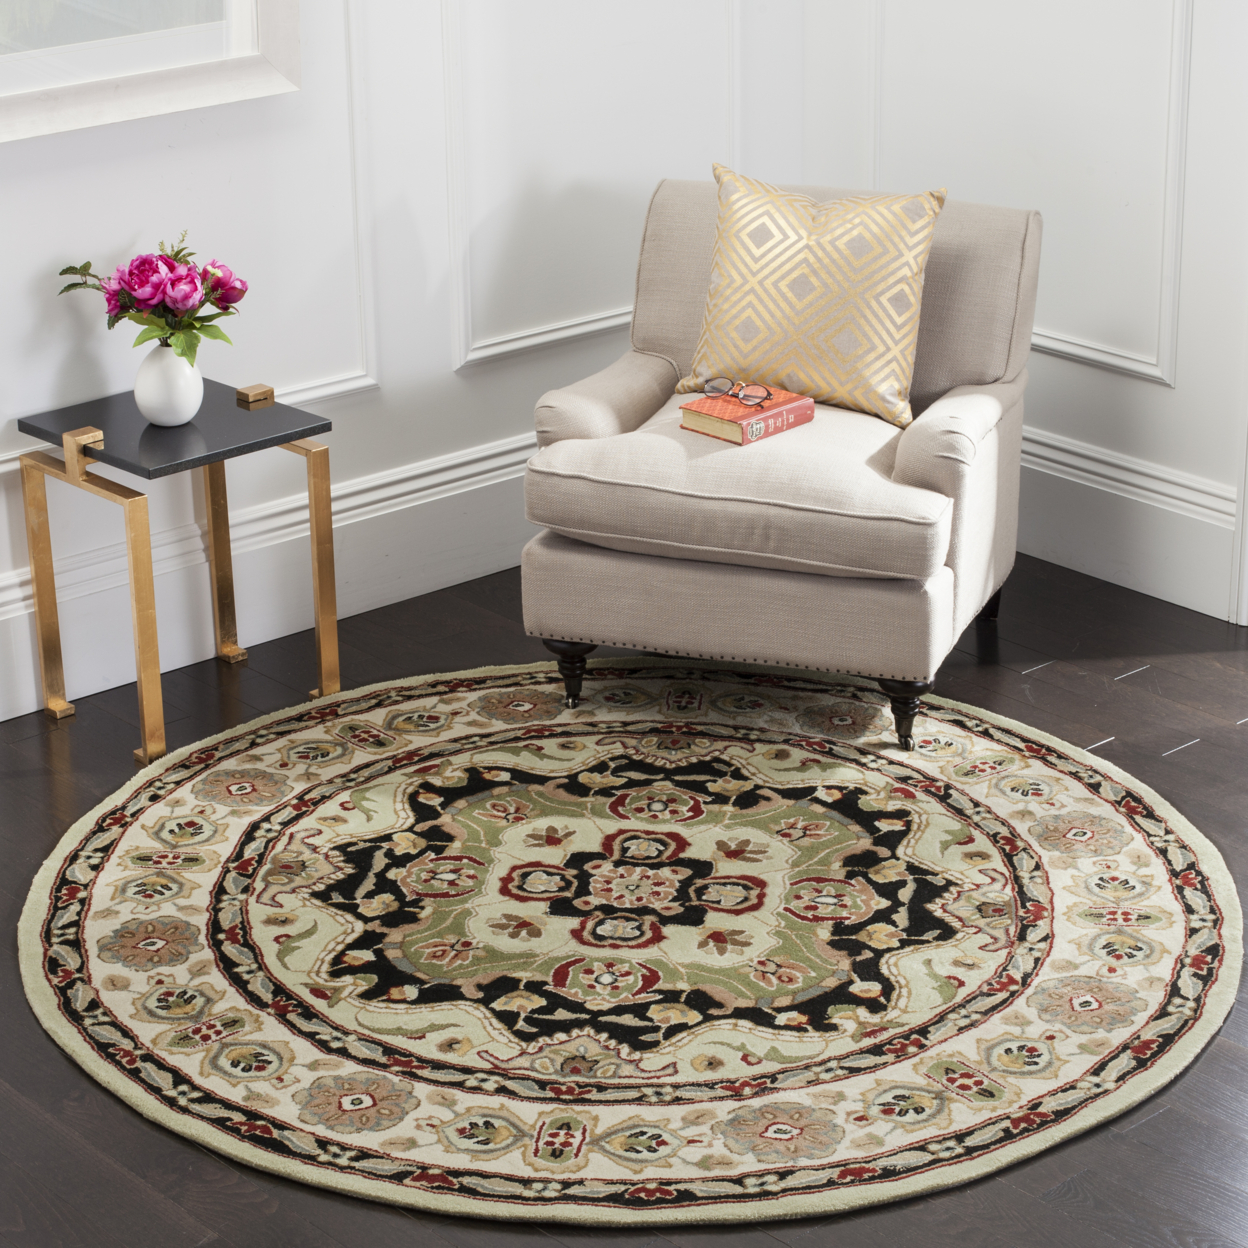 SAFAVIEH Total Performance TLP718A Soft Green / Ivory Rug - 8' Round